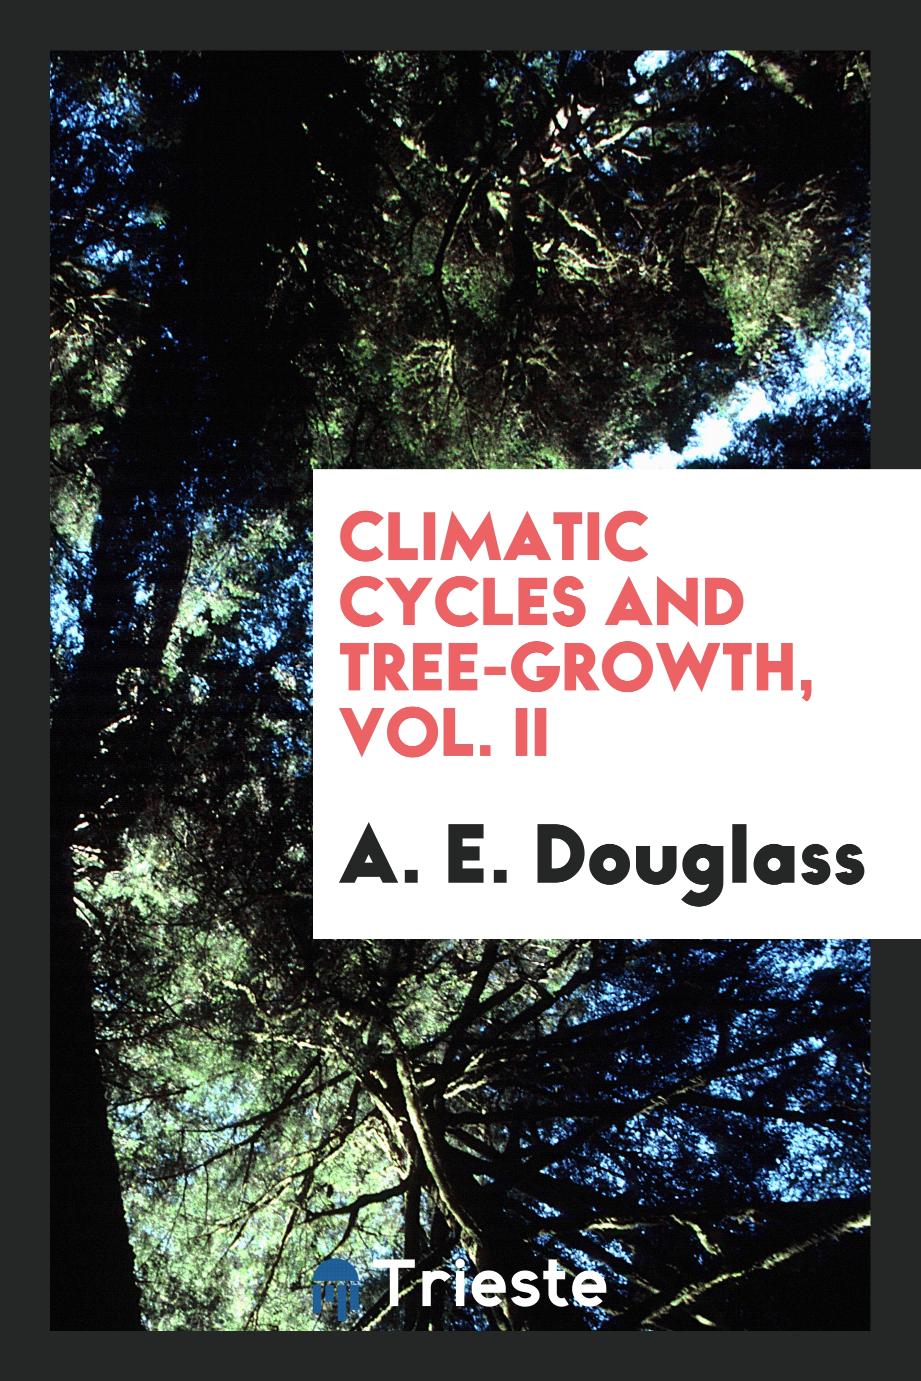 Climatic cycles and tree-growth, Vol. II